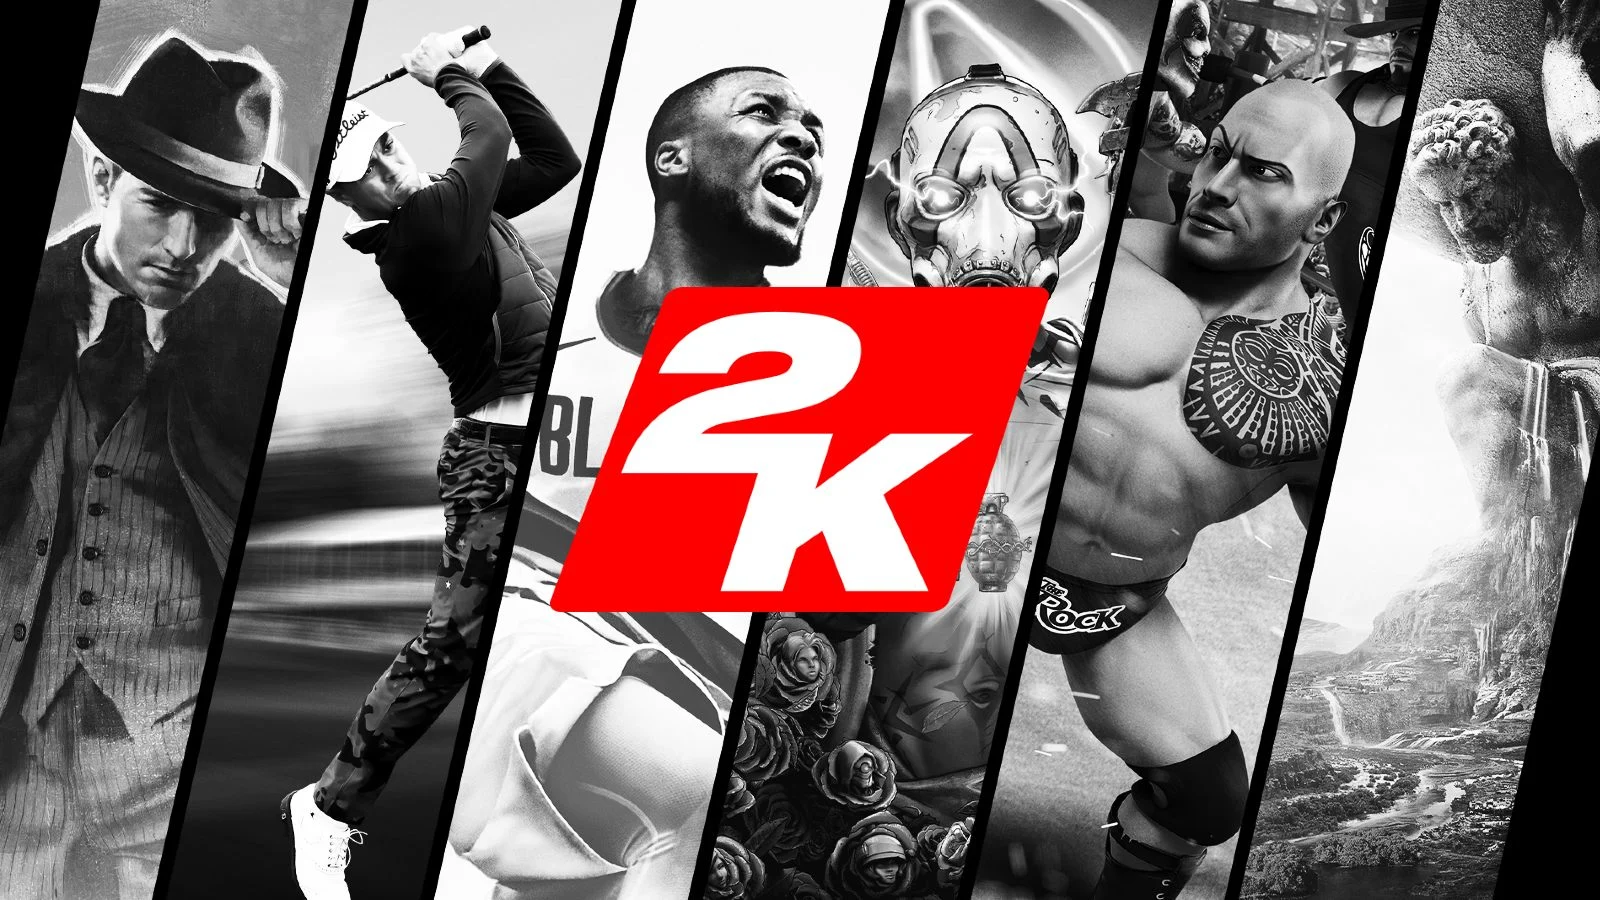 Customers' Data from 2K Games Reportedly Being Sold Online